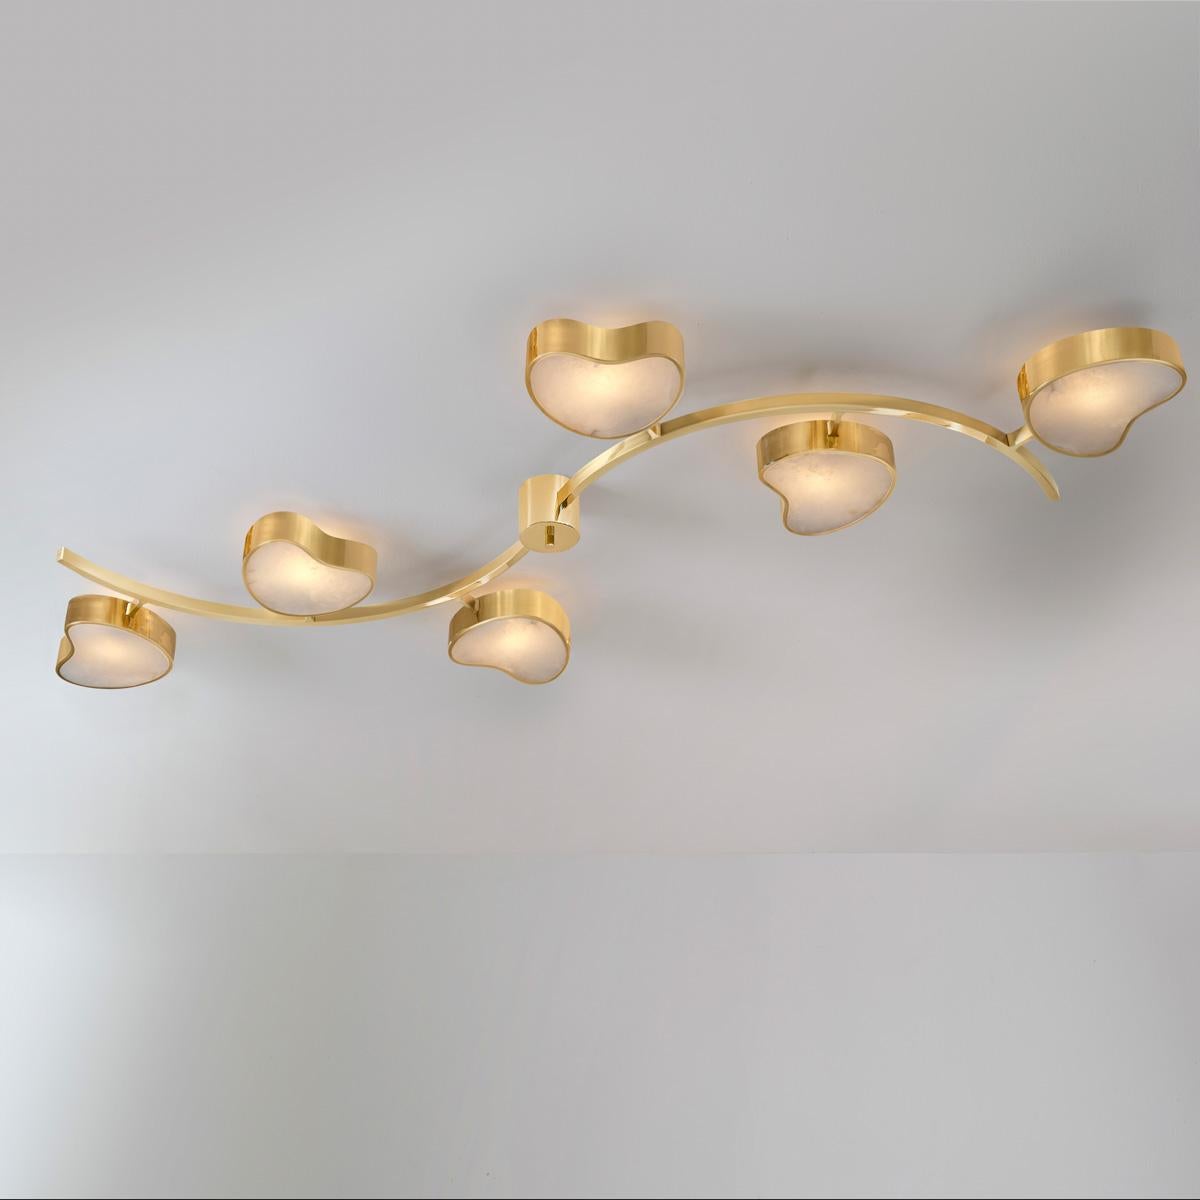 Cuore N.6 Ceiling Light by Gaspare Asaro. Peltro and Bronze Finish For Sale 4